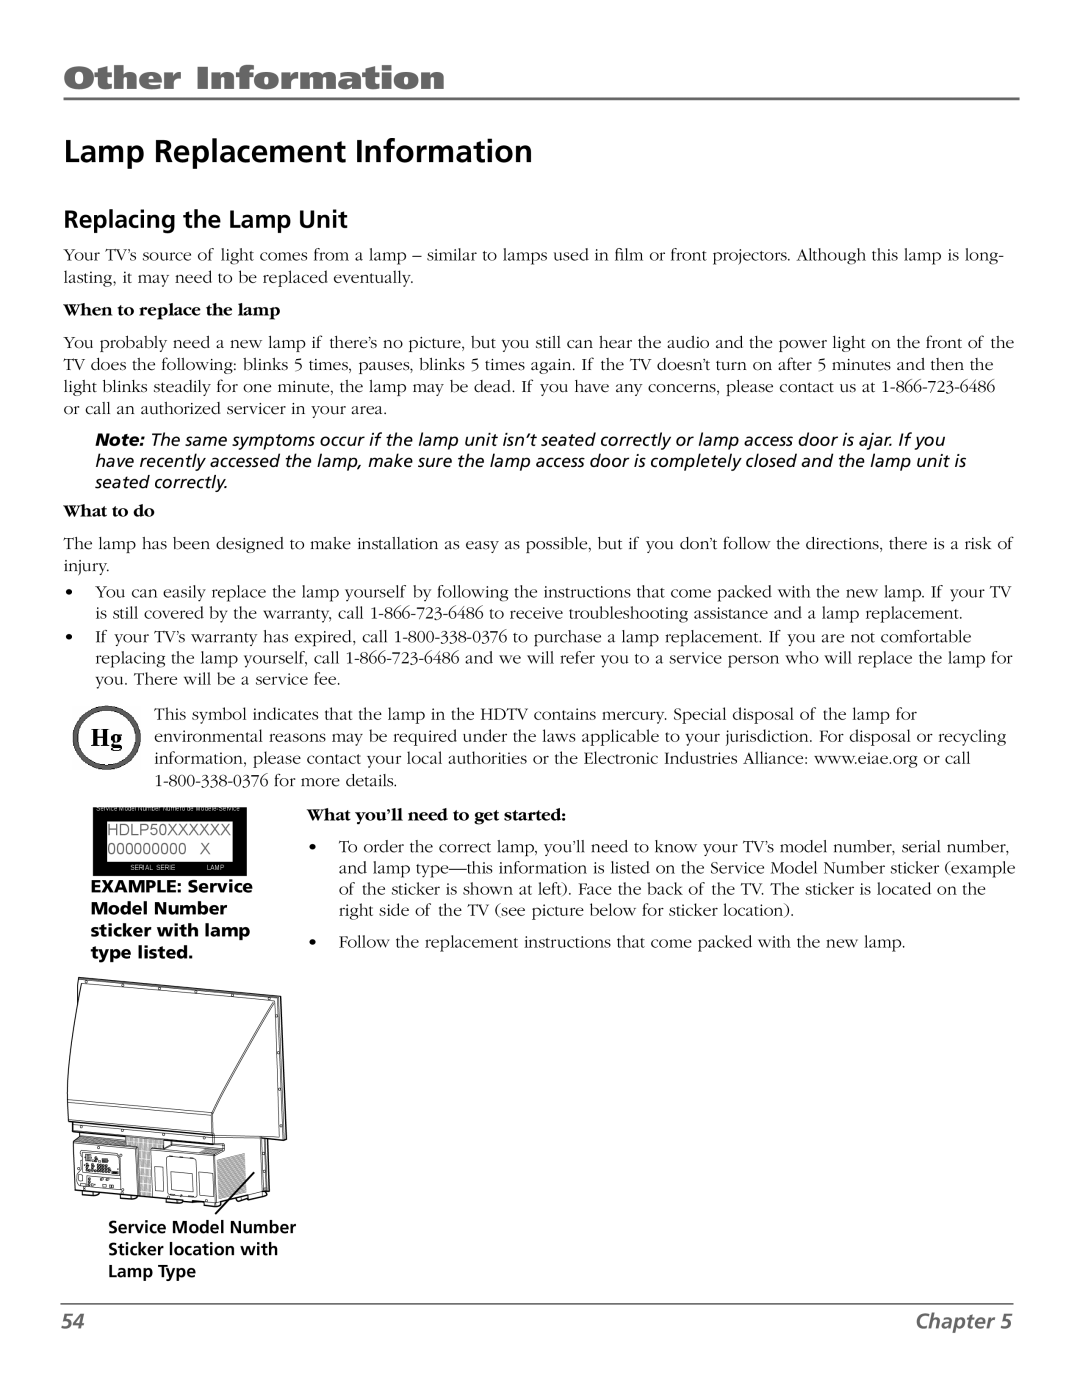 RCA M50WH187 Lamp Replacement Information, Replacing the Lamp Unit, Service Model Number Sticker location with Lamp Type 